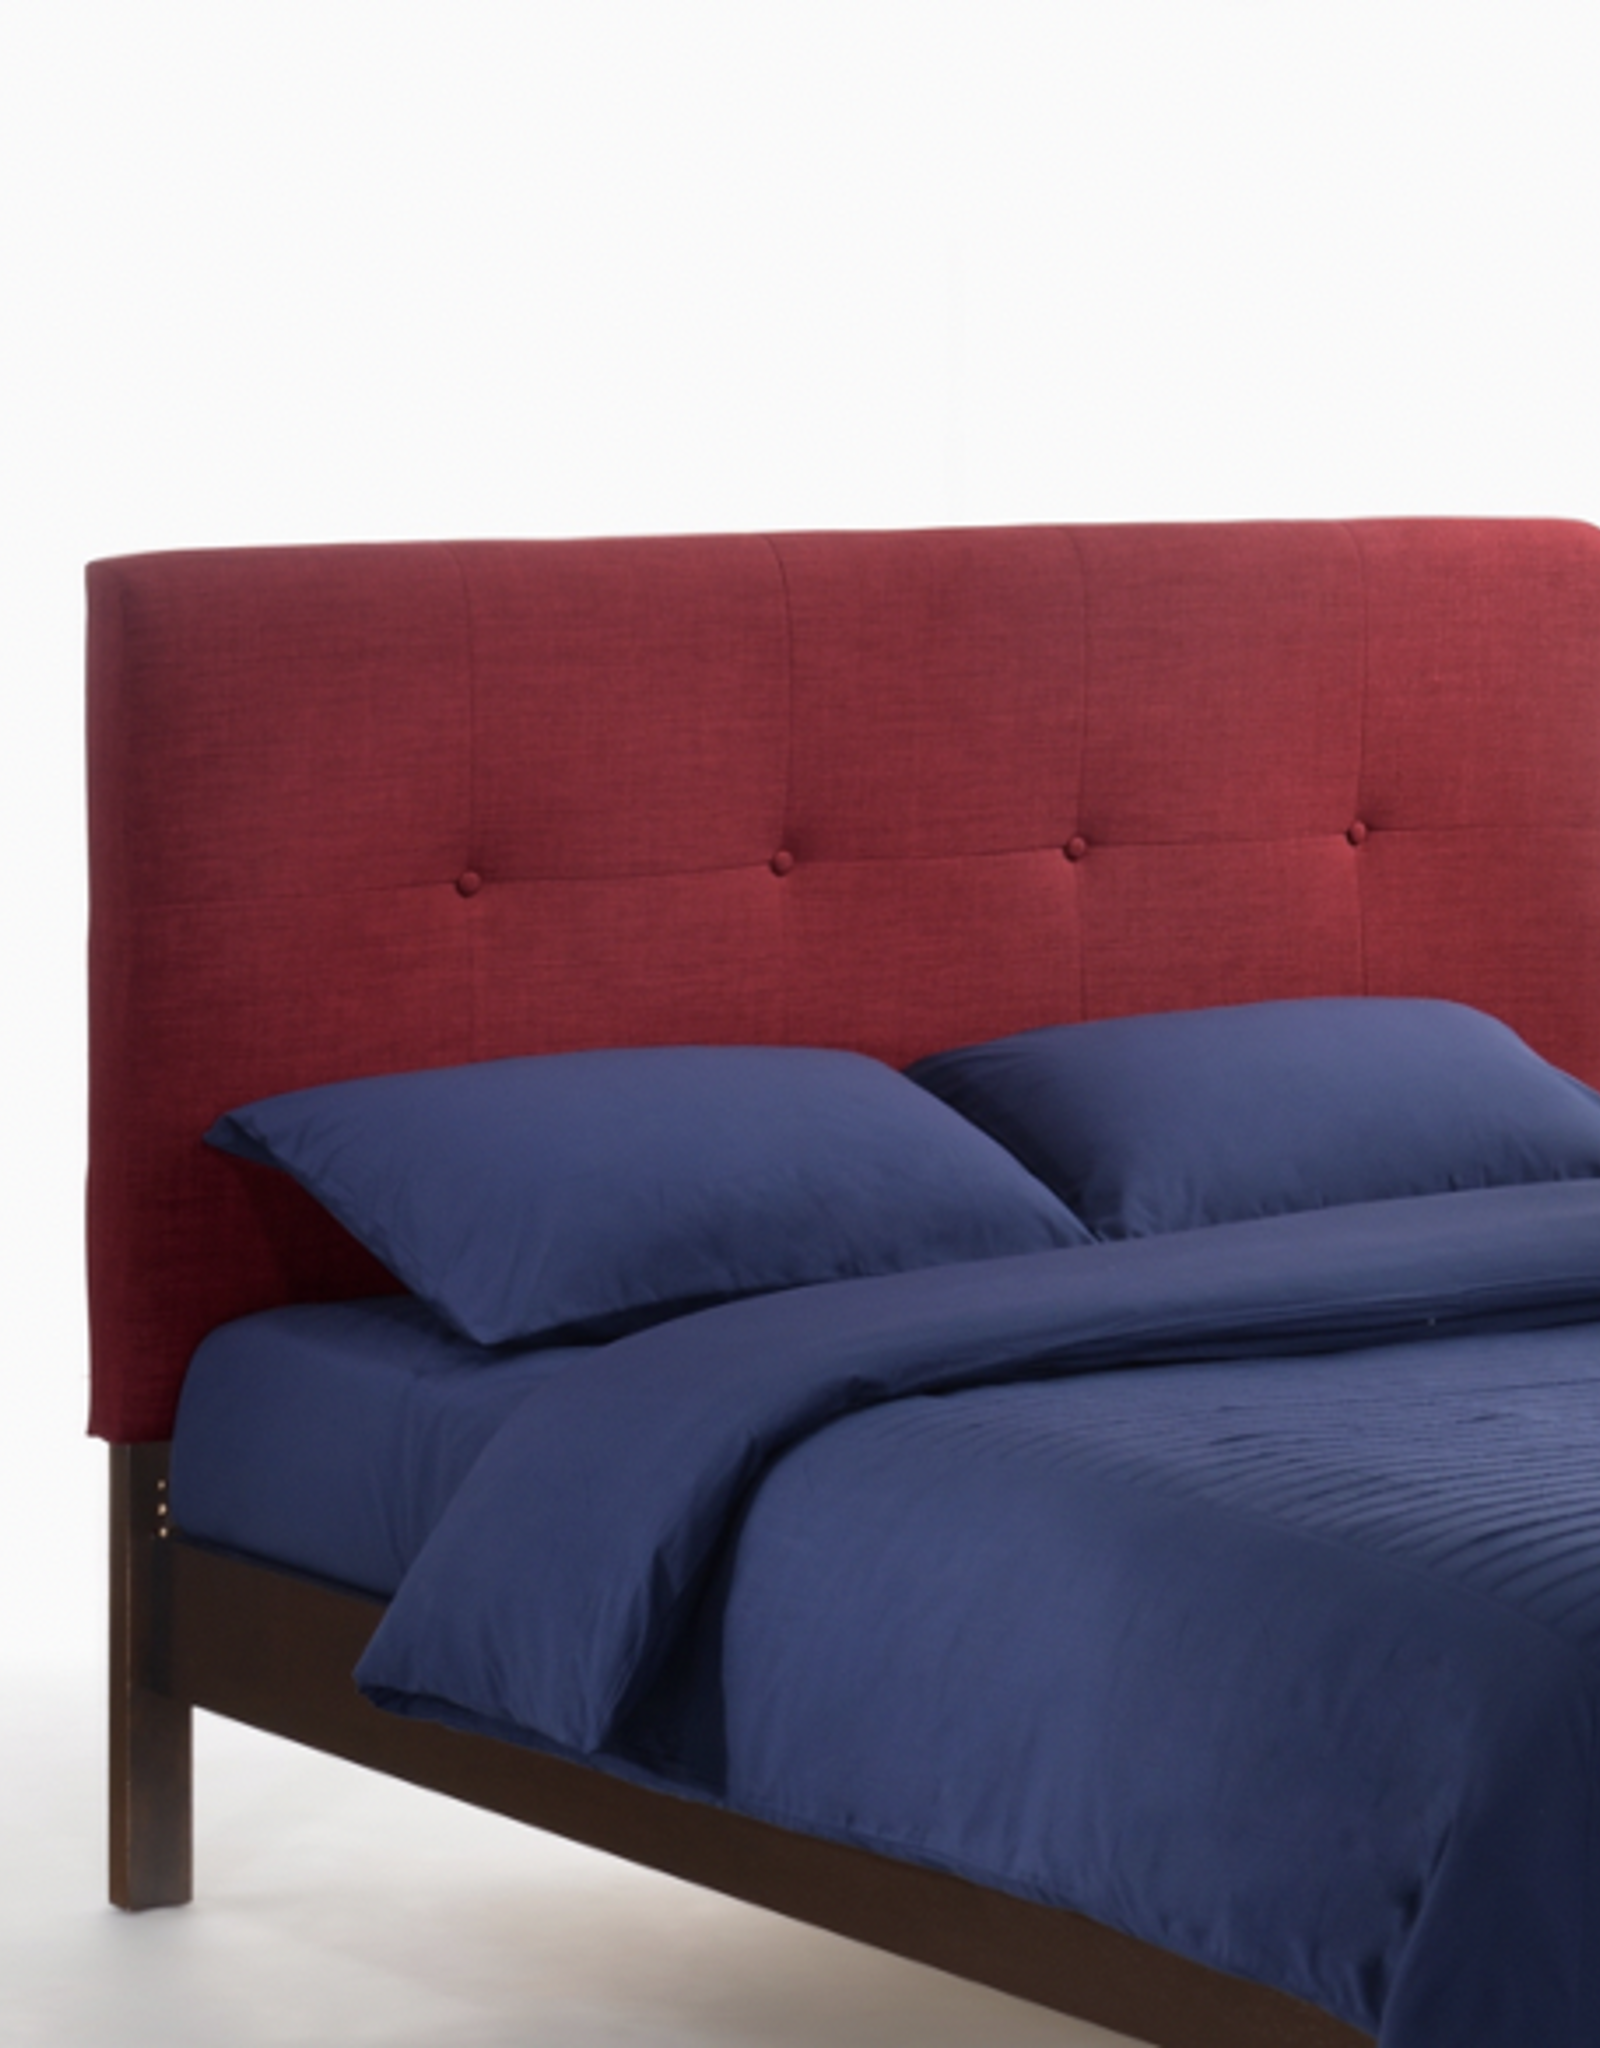 Paprika Headboard - Comes in Four Colors